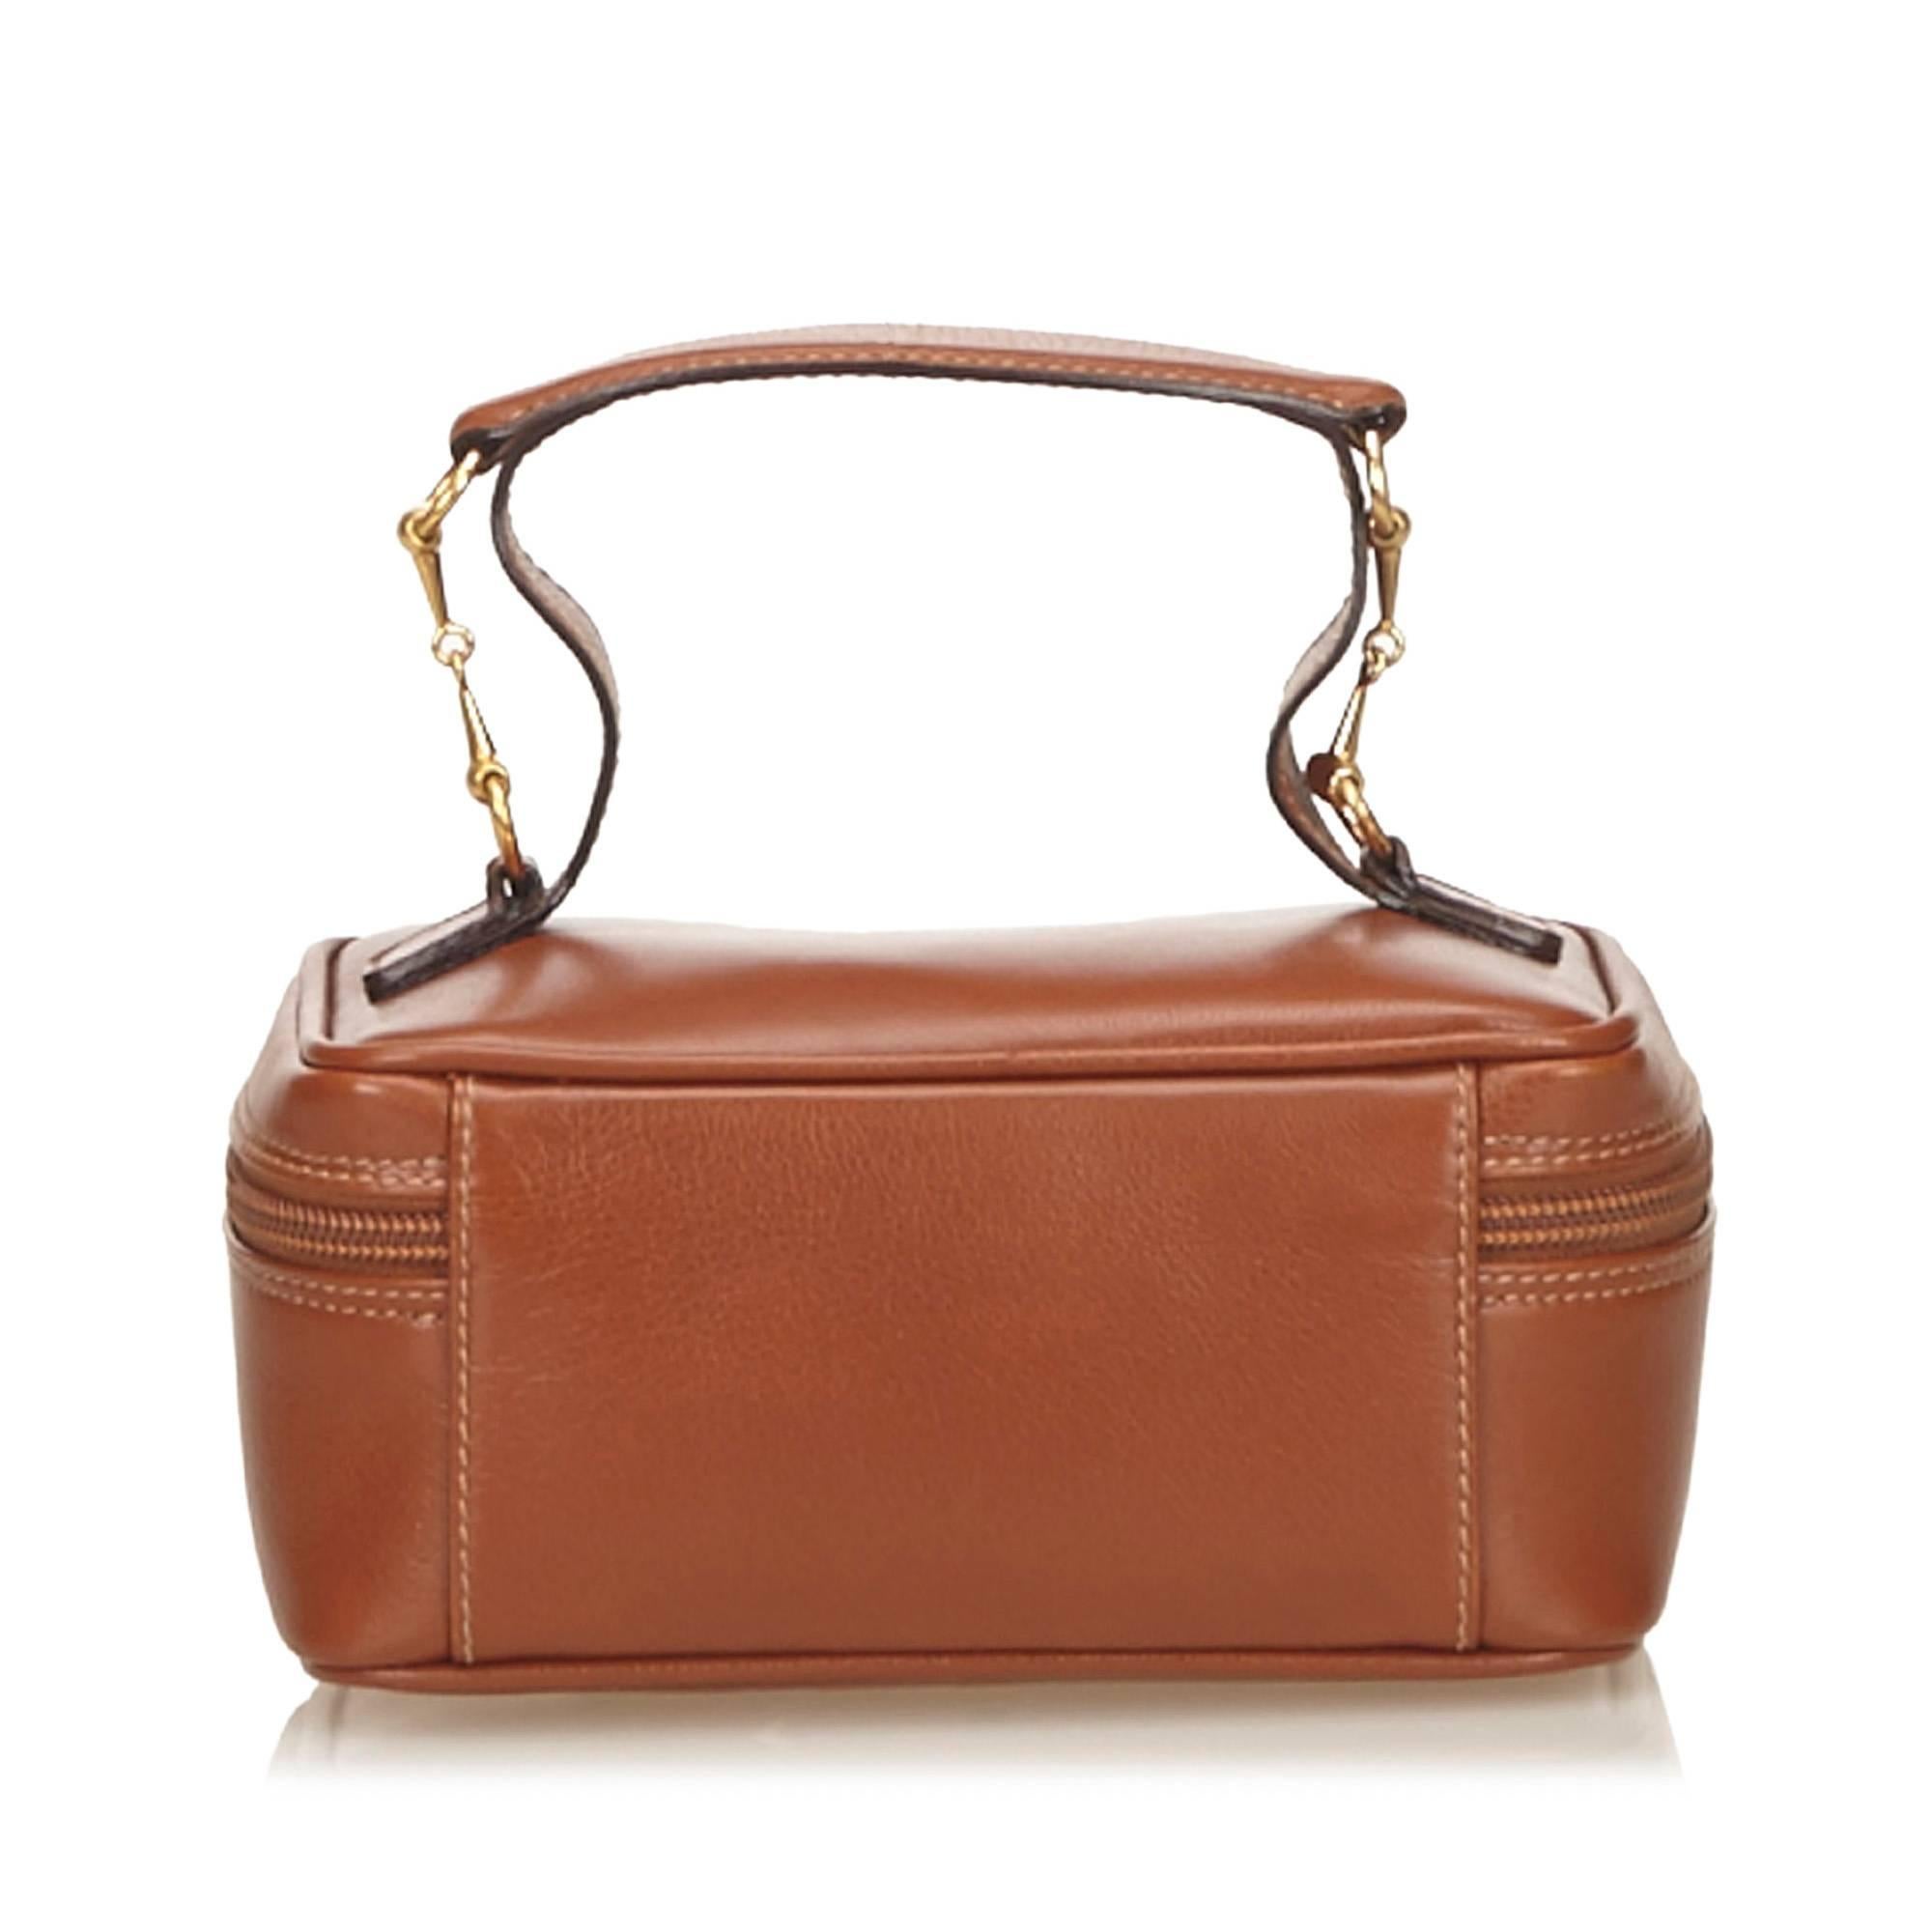 This vanity bag features a leather body, a top handle with gold-tone horse bit hardware, and a top zip around closure.

Color: Brown